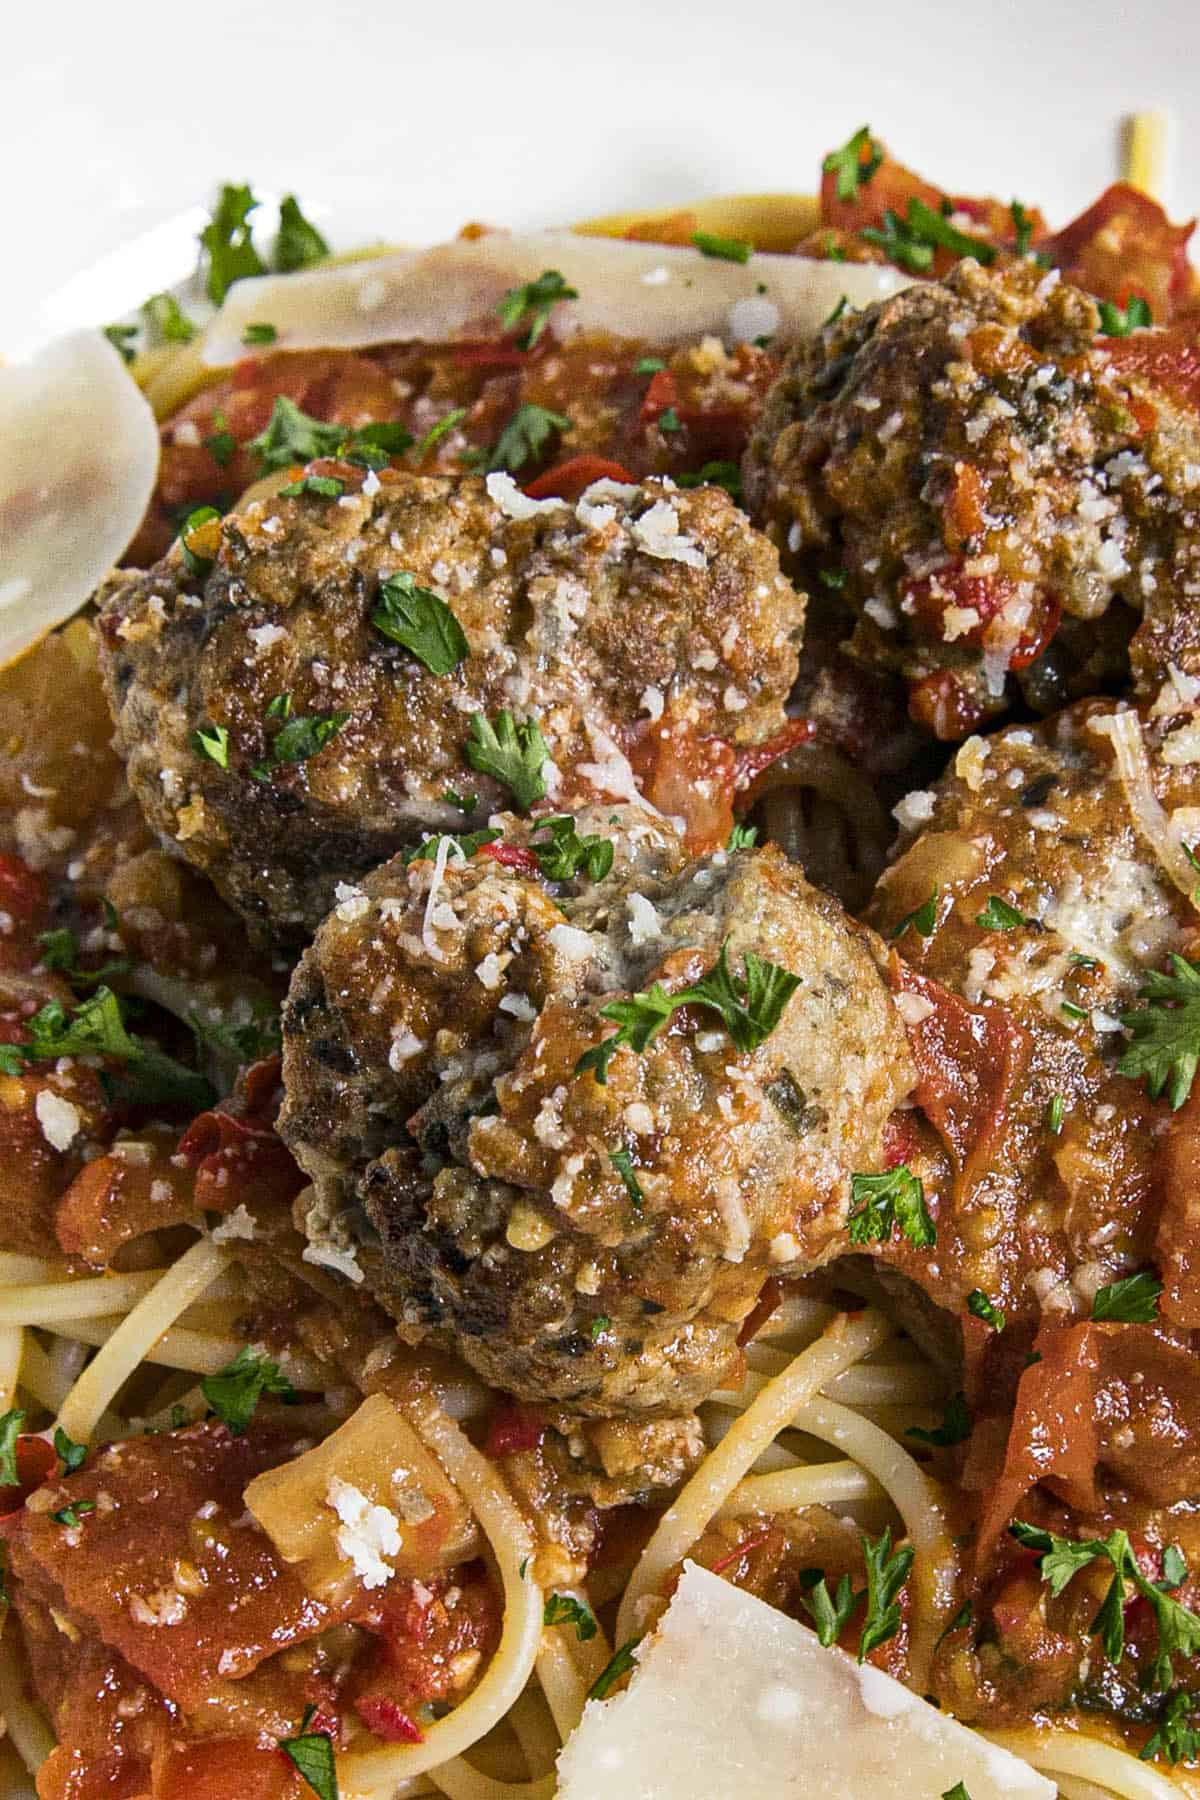 Spicy Italian Meatballs served with spaghetti